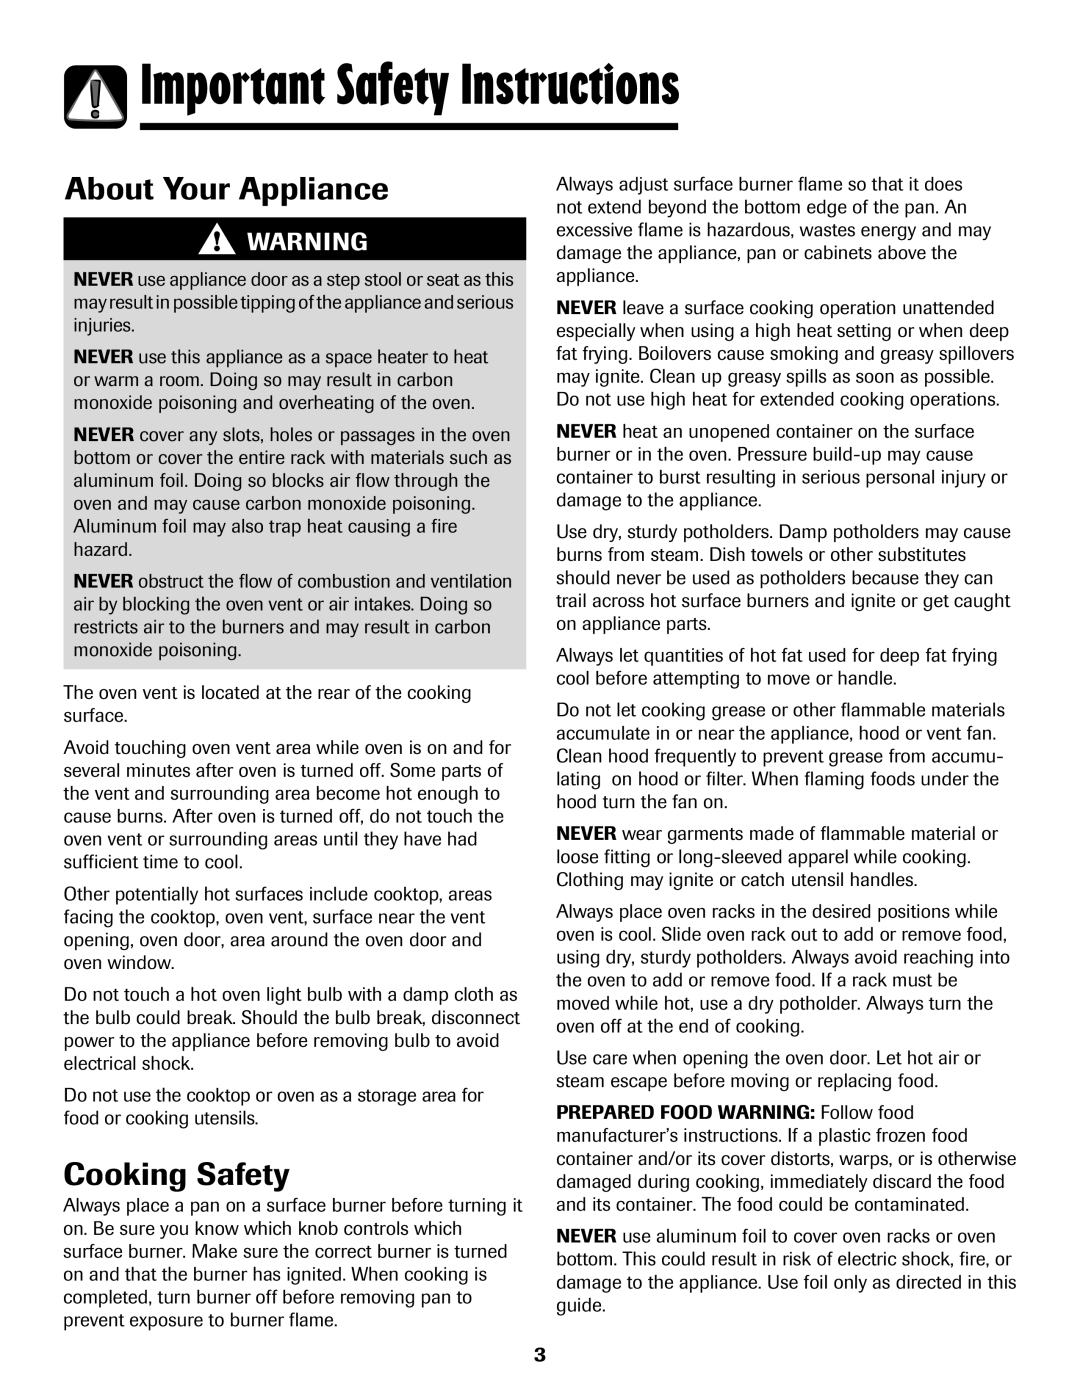 Amana 500 manual About Your Appliance, Cooking Safety, Important Safety Instructions 